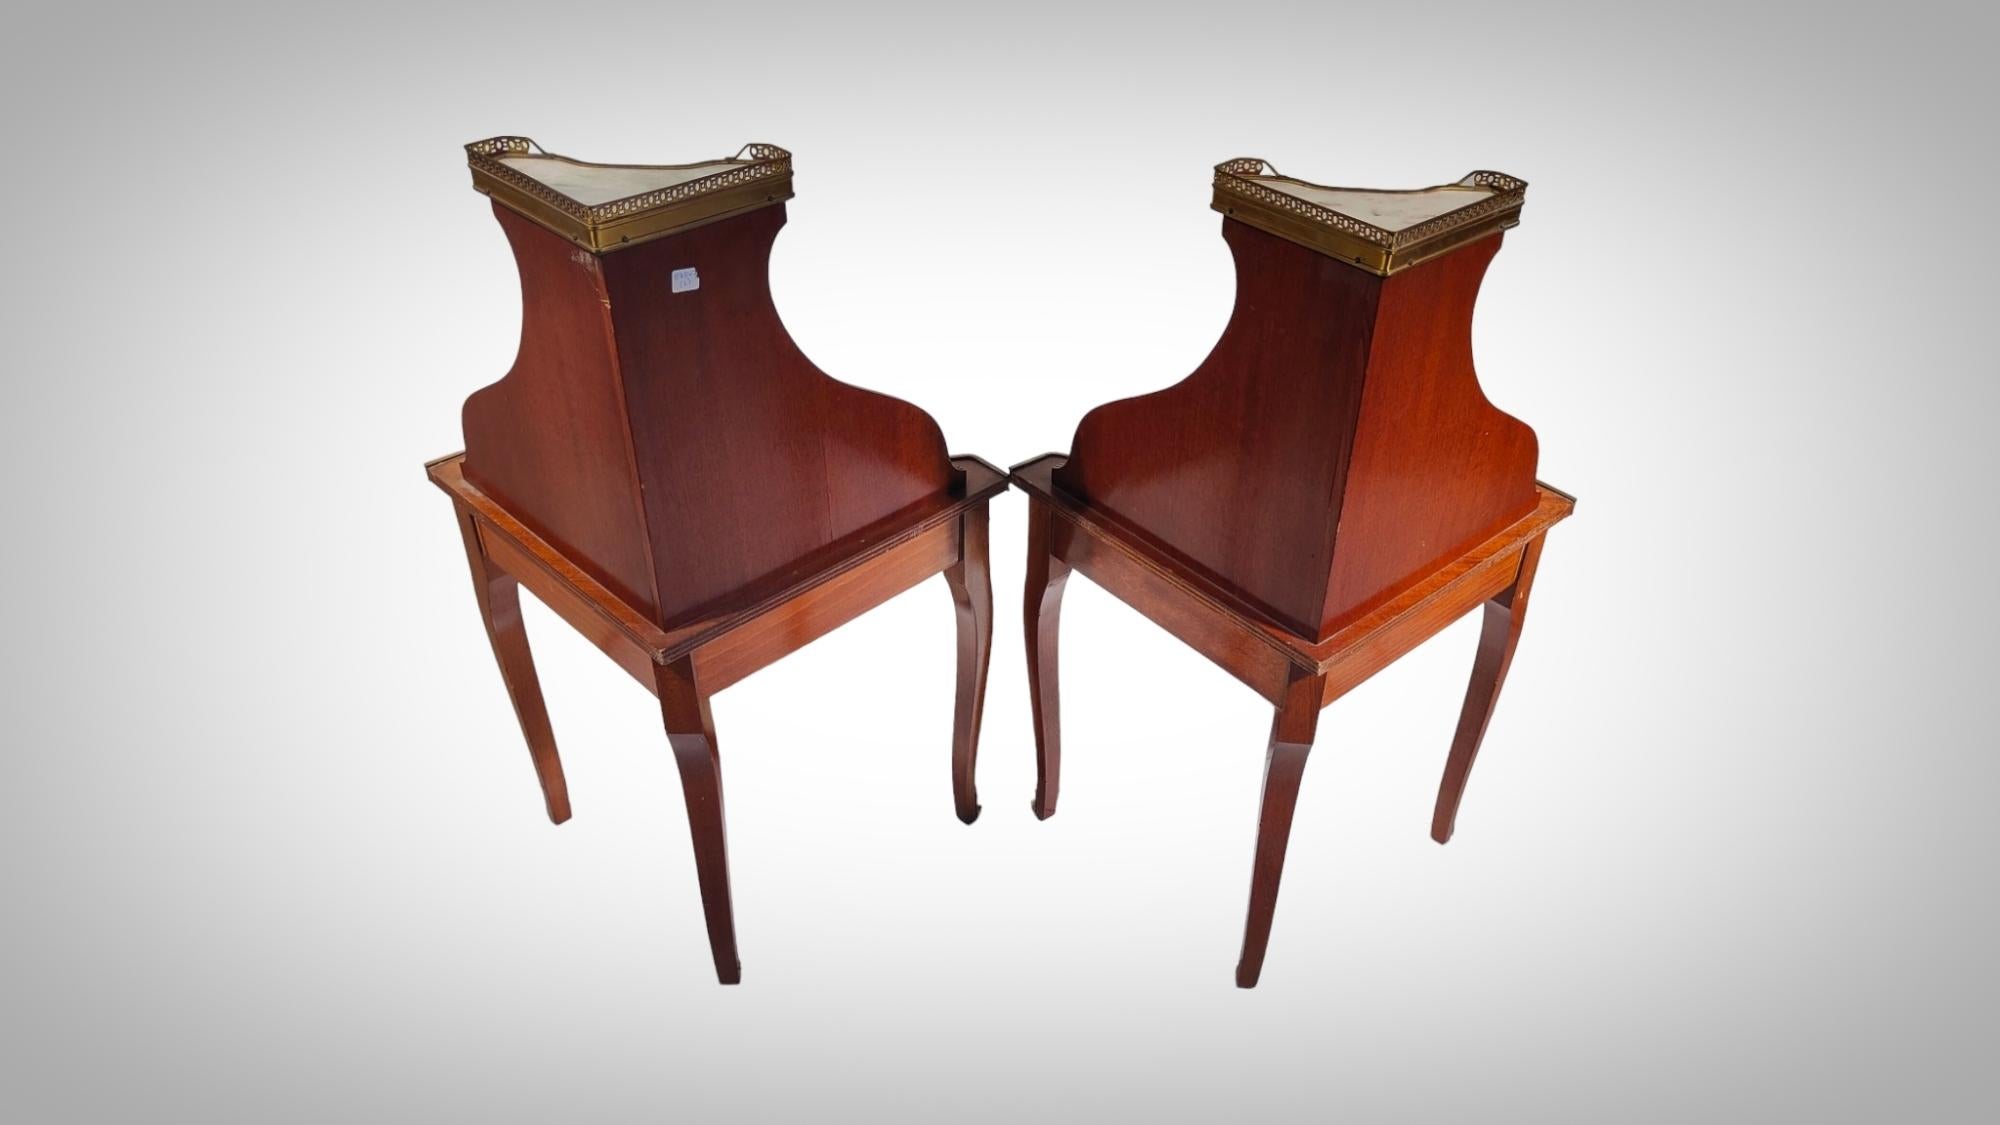 Late 19th Century Pair Of Corner Side Tables With Openwork Railing And Marble Top For Sale